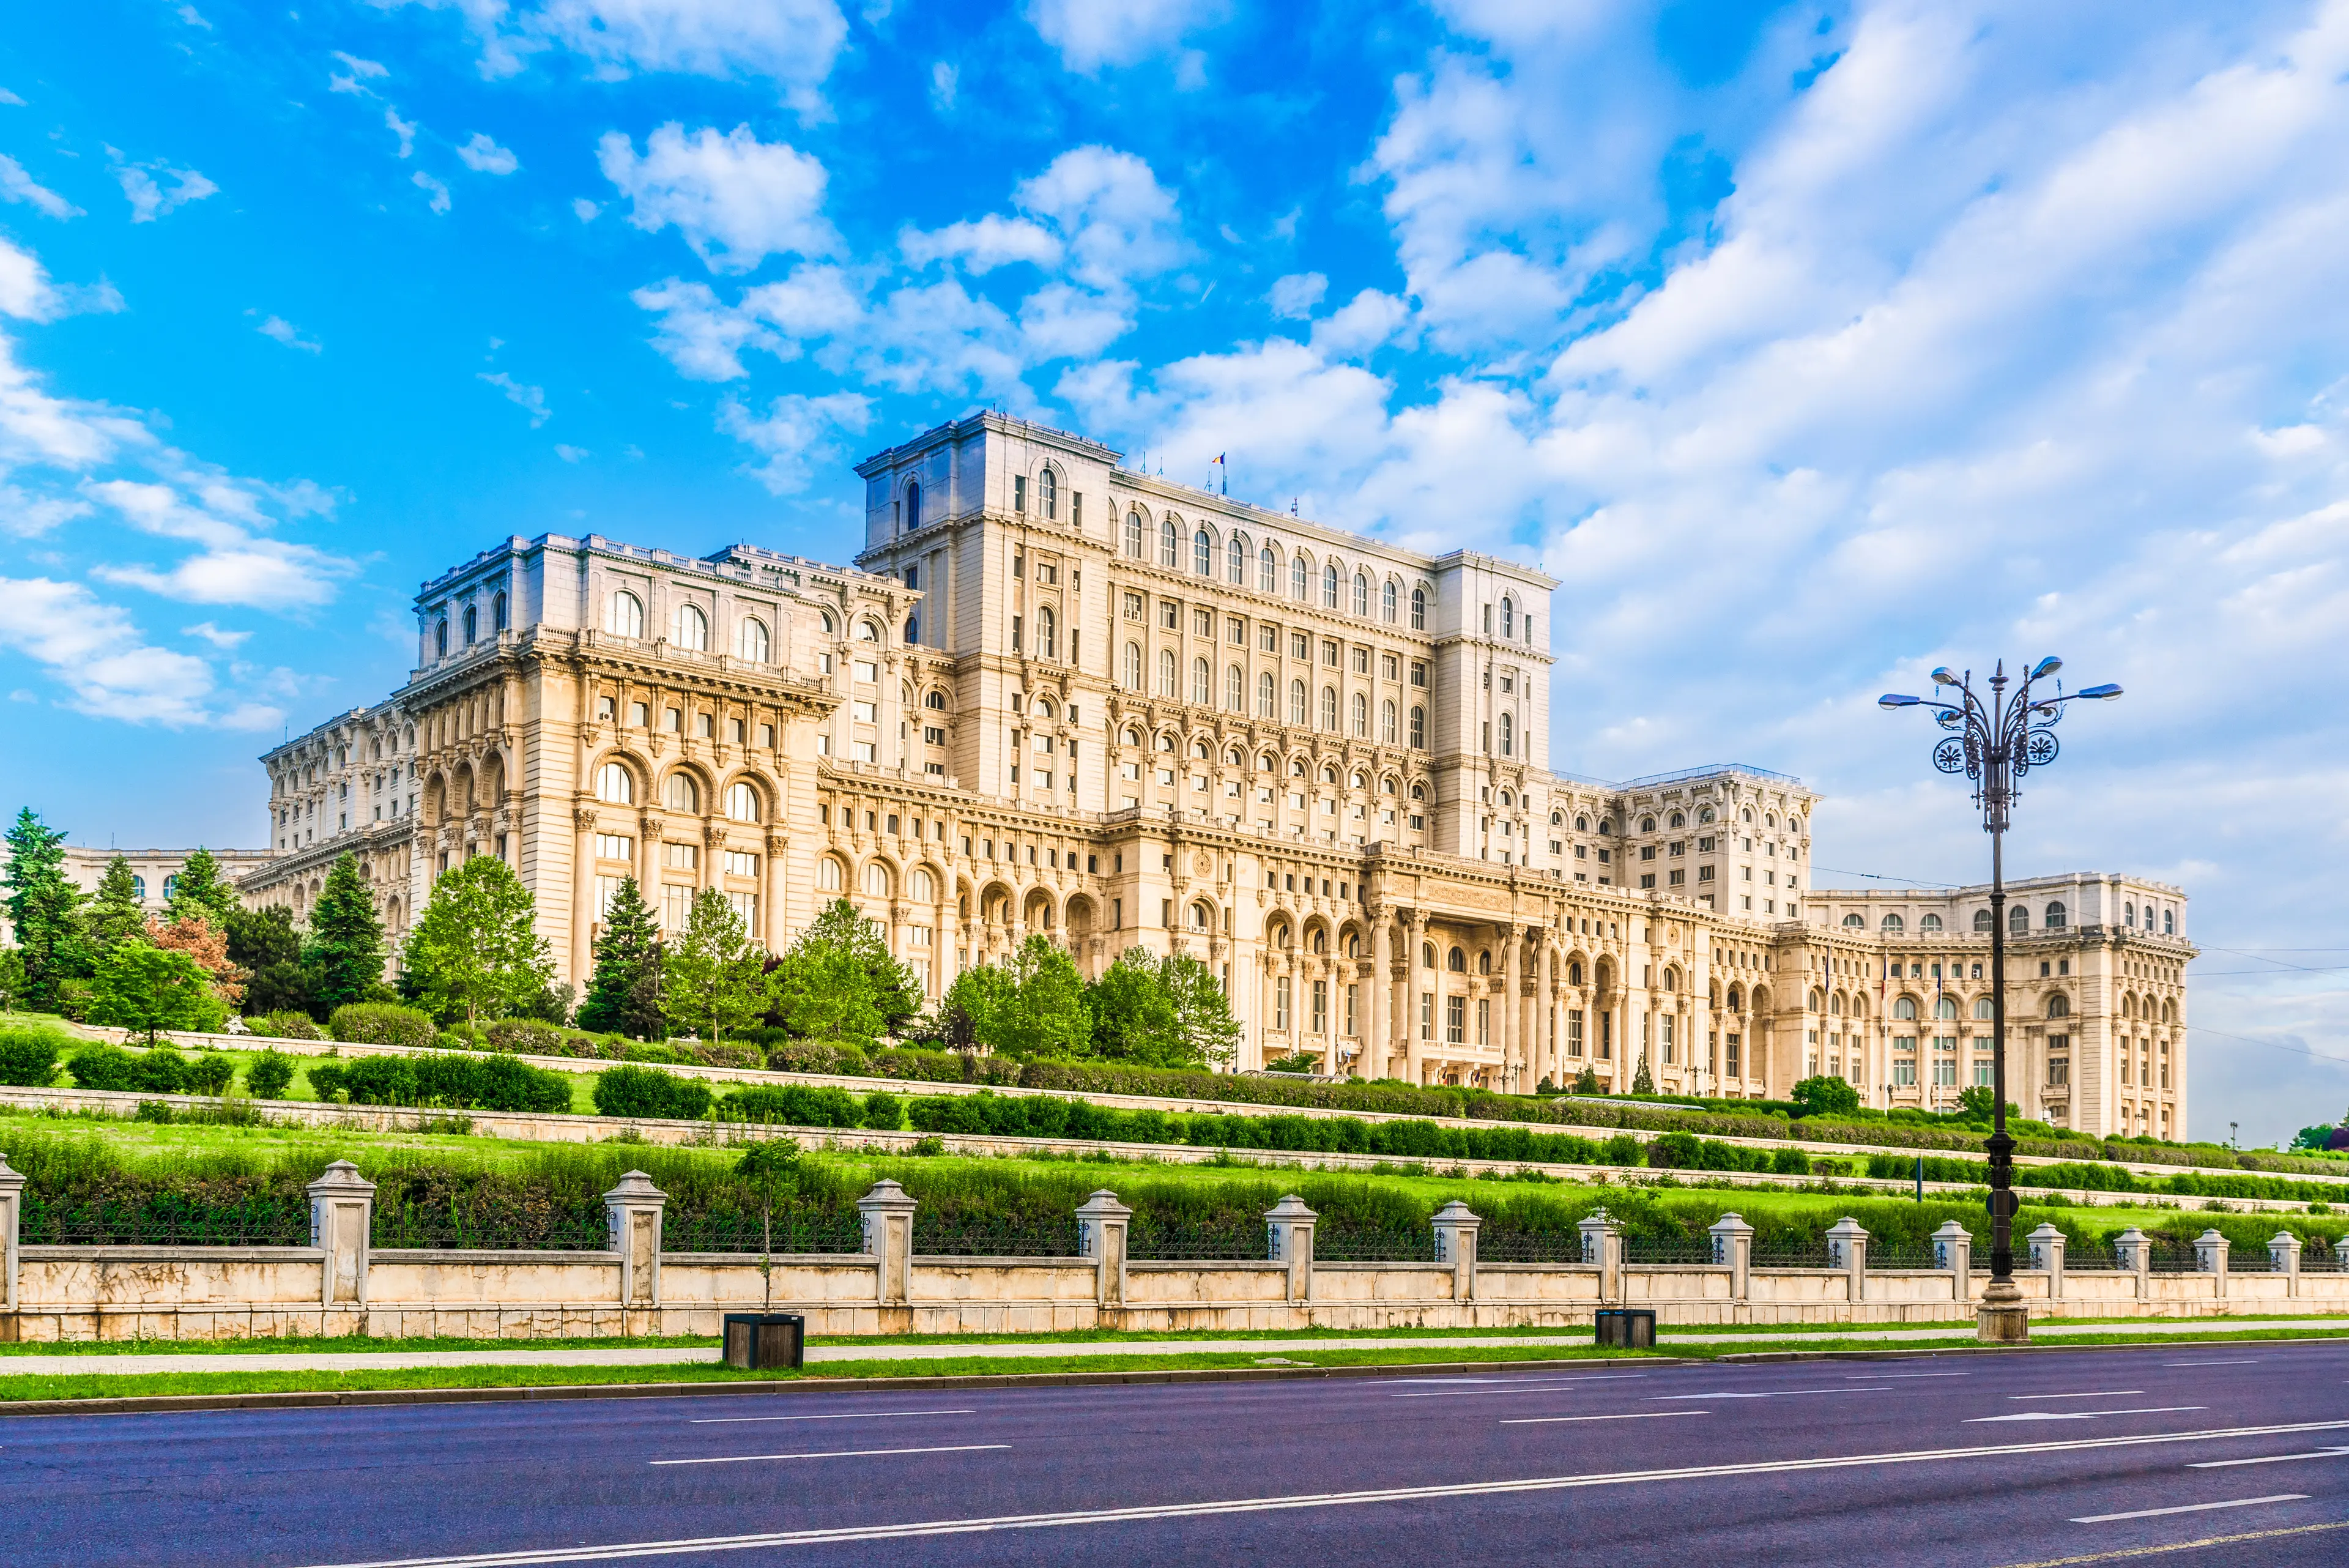 3-Day Bucharest Adventure: Relaxation, Sightseeing and Culinary Delights